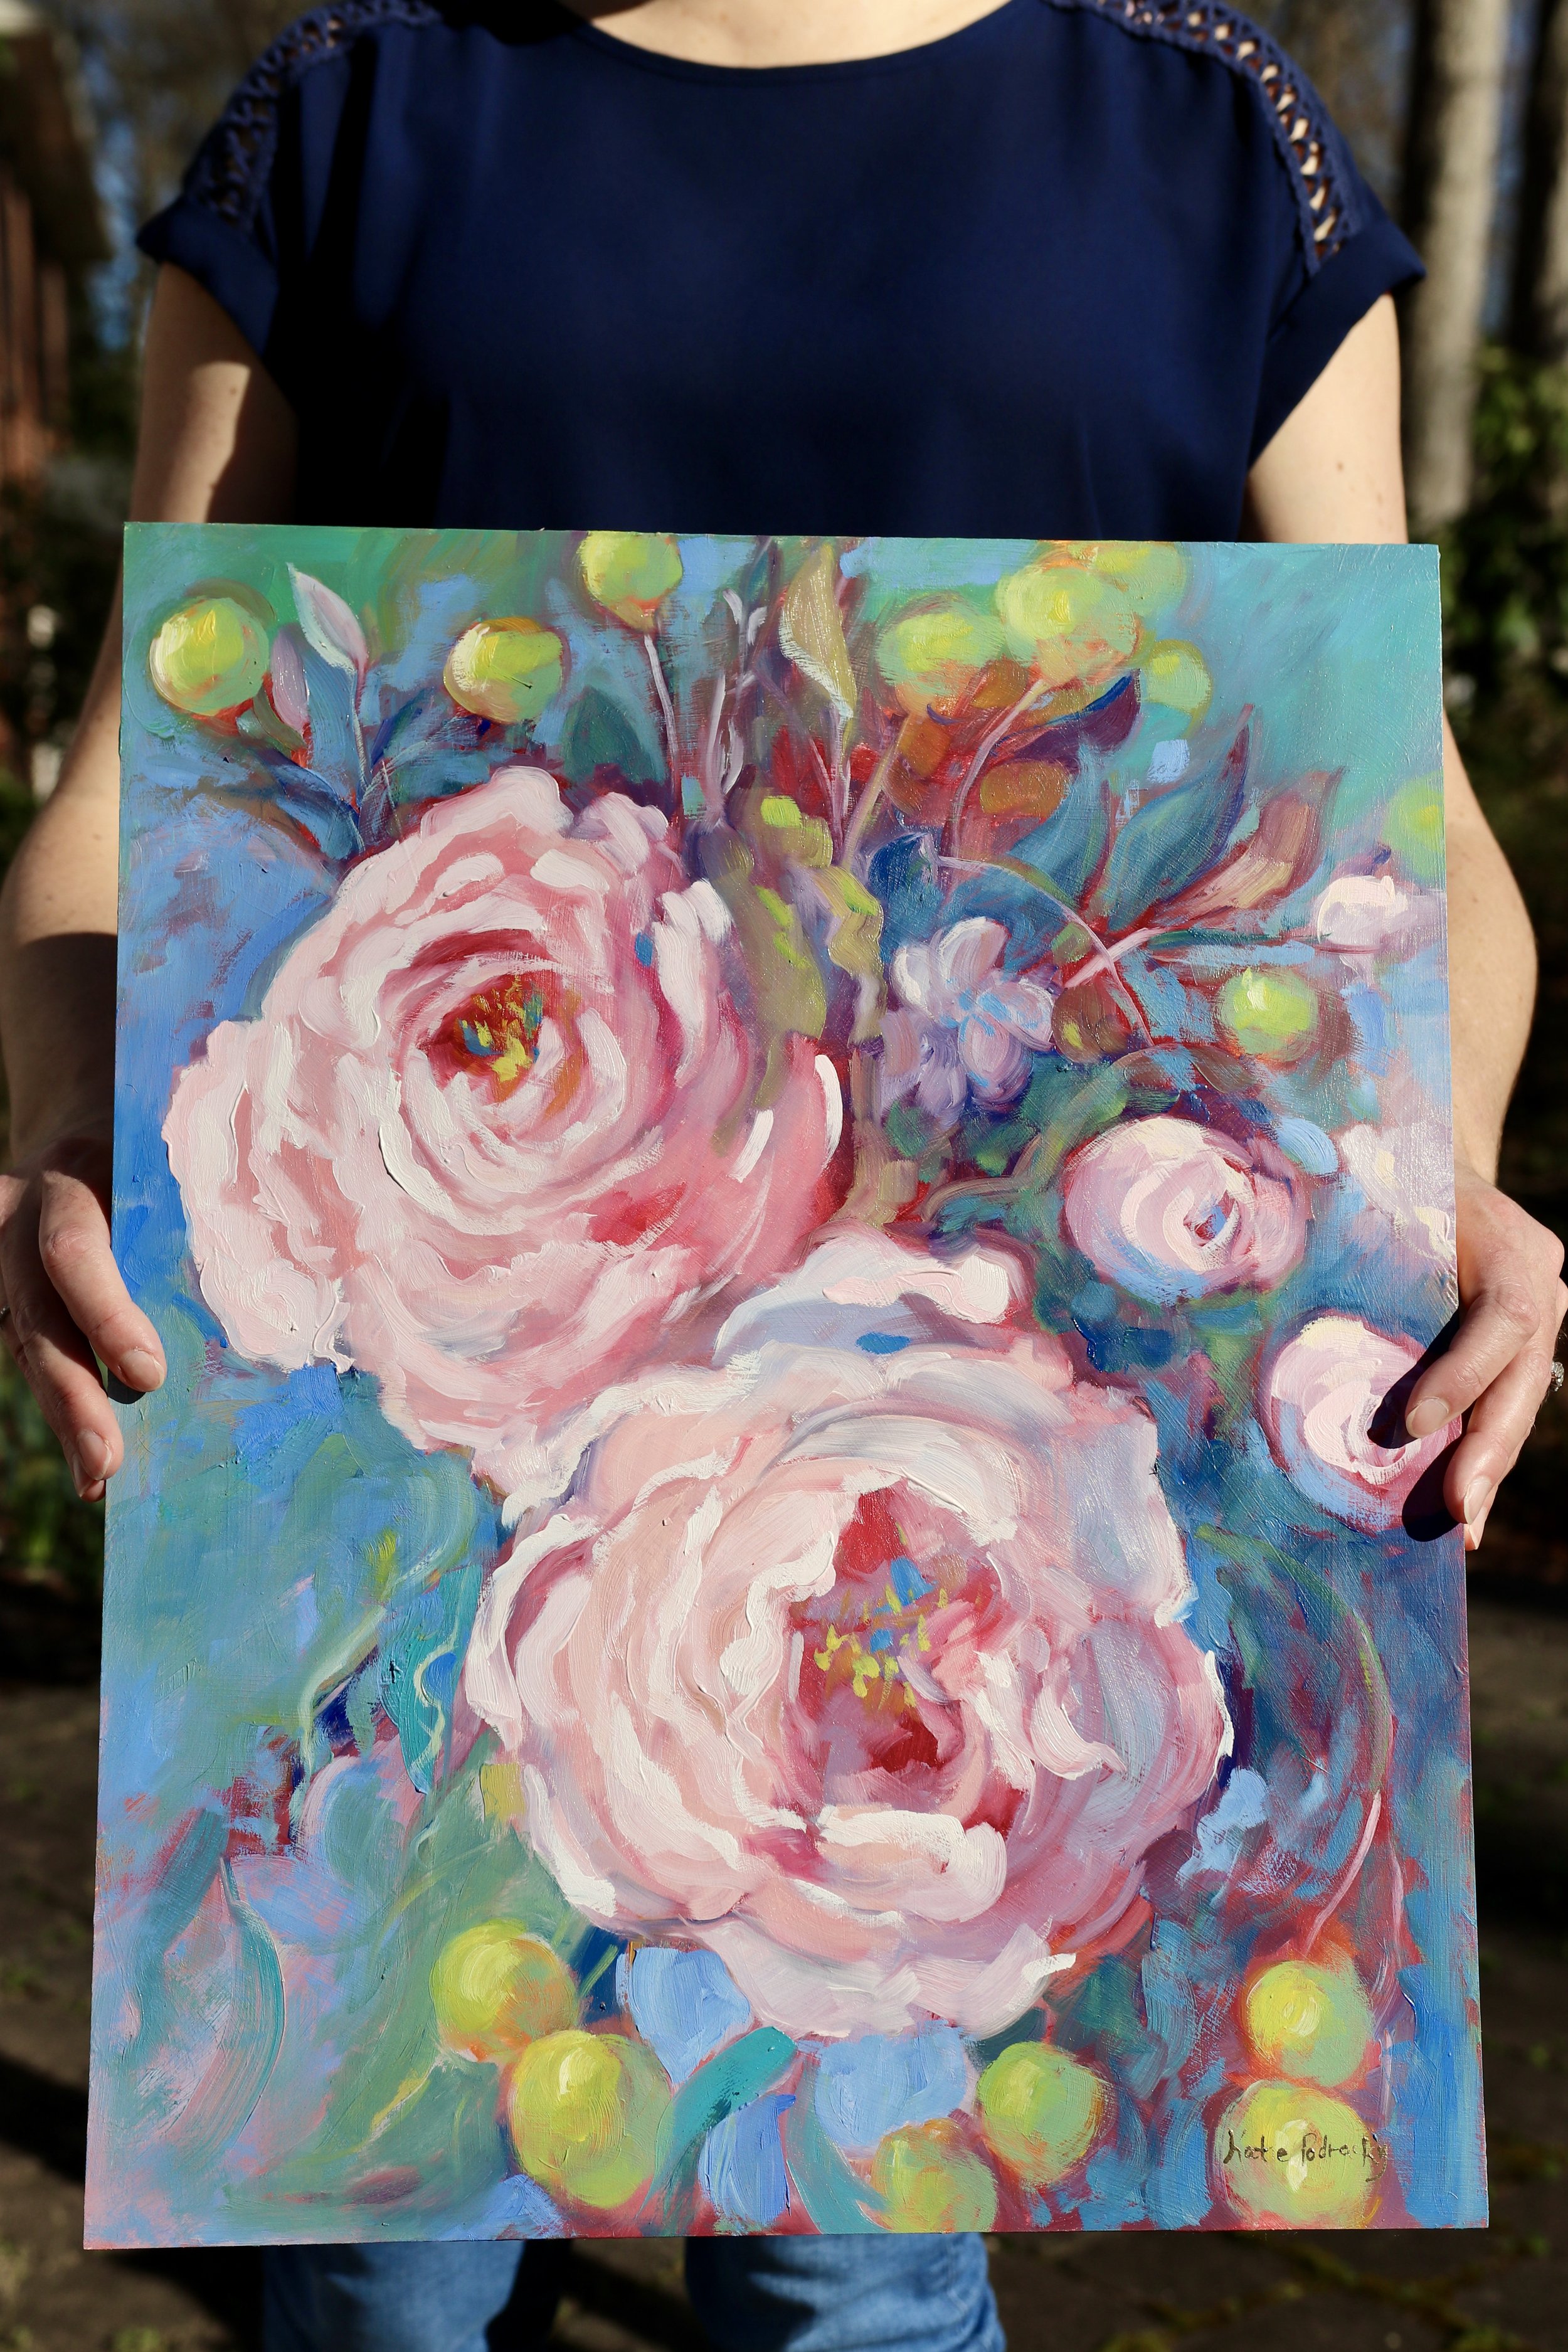 TheyRemindMeOfYou-KatiePodracky-2023-oil-painting-on-panel-abstract-floral-peony-rose-petal-painterly-2023.JPG